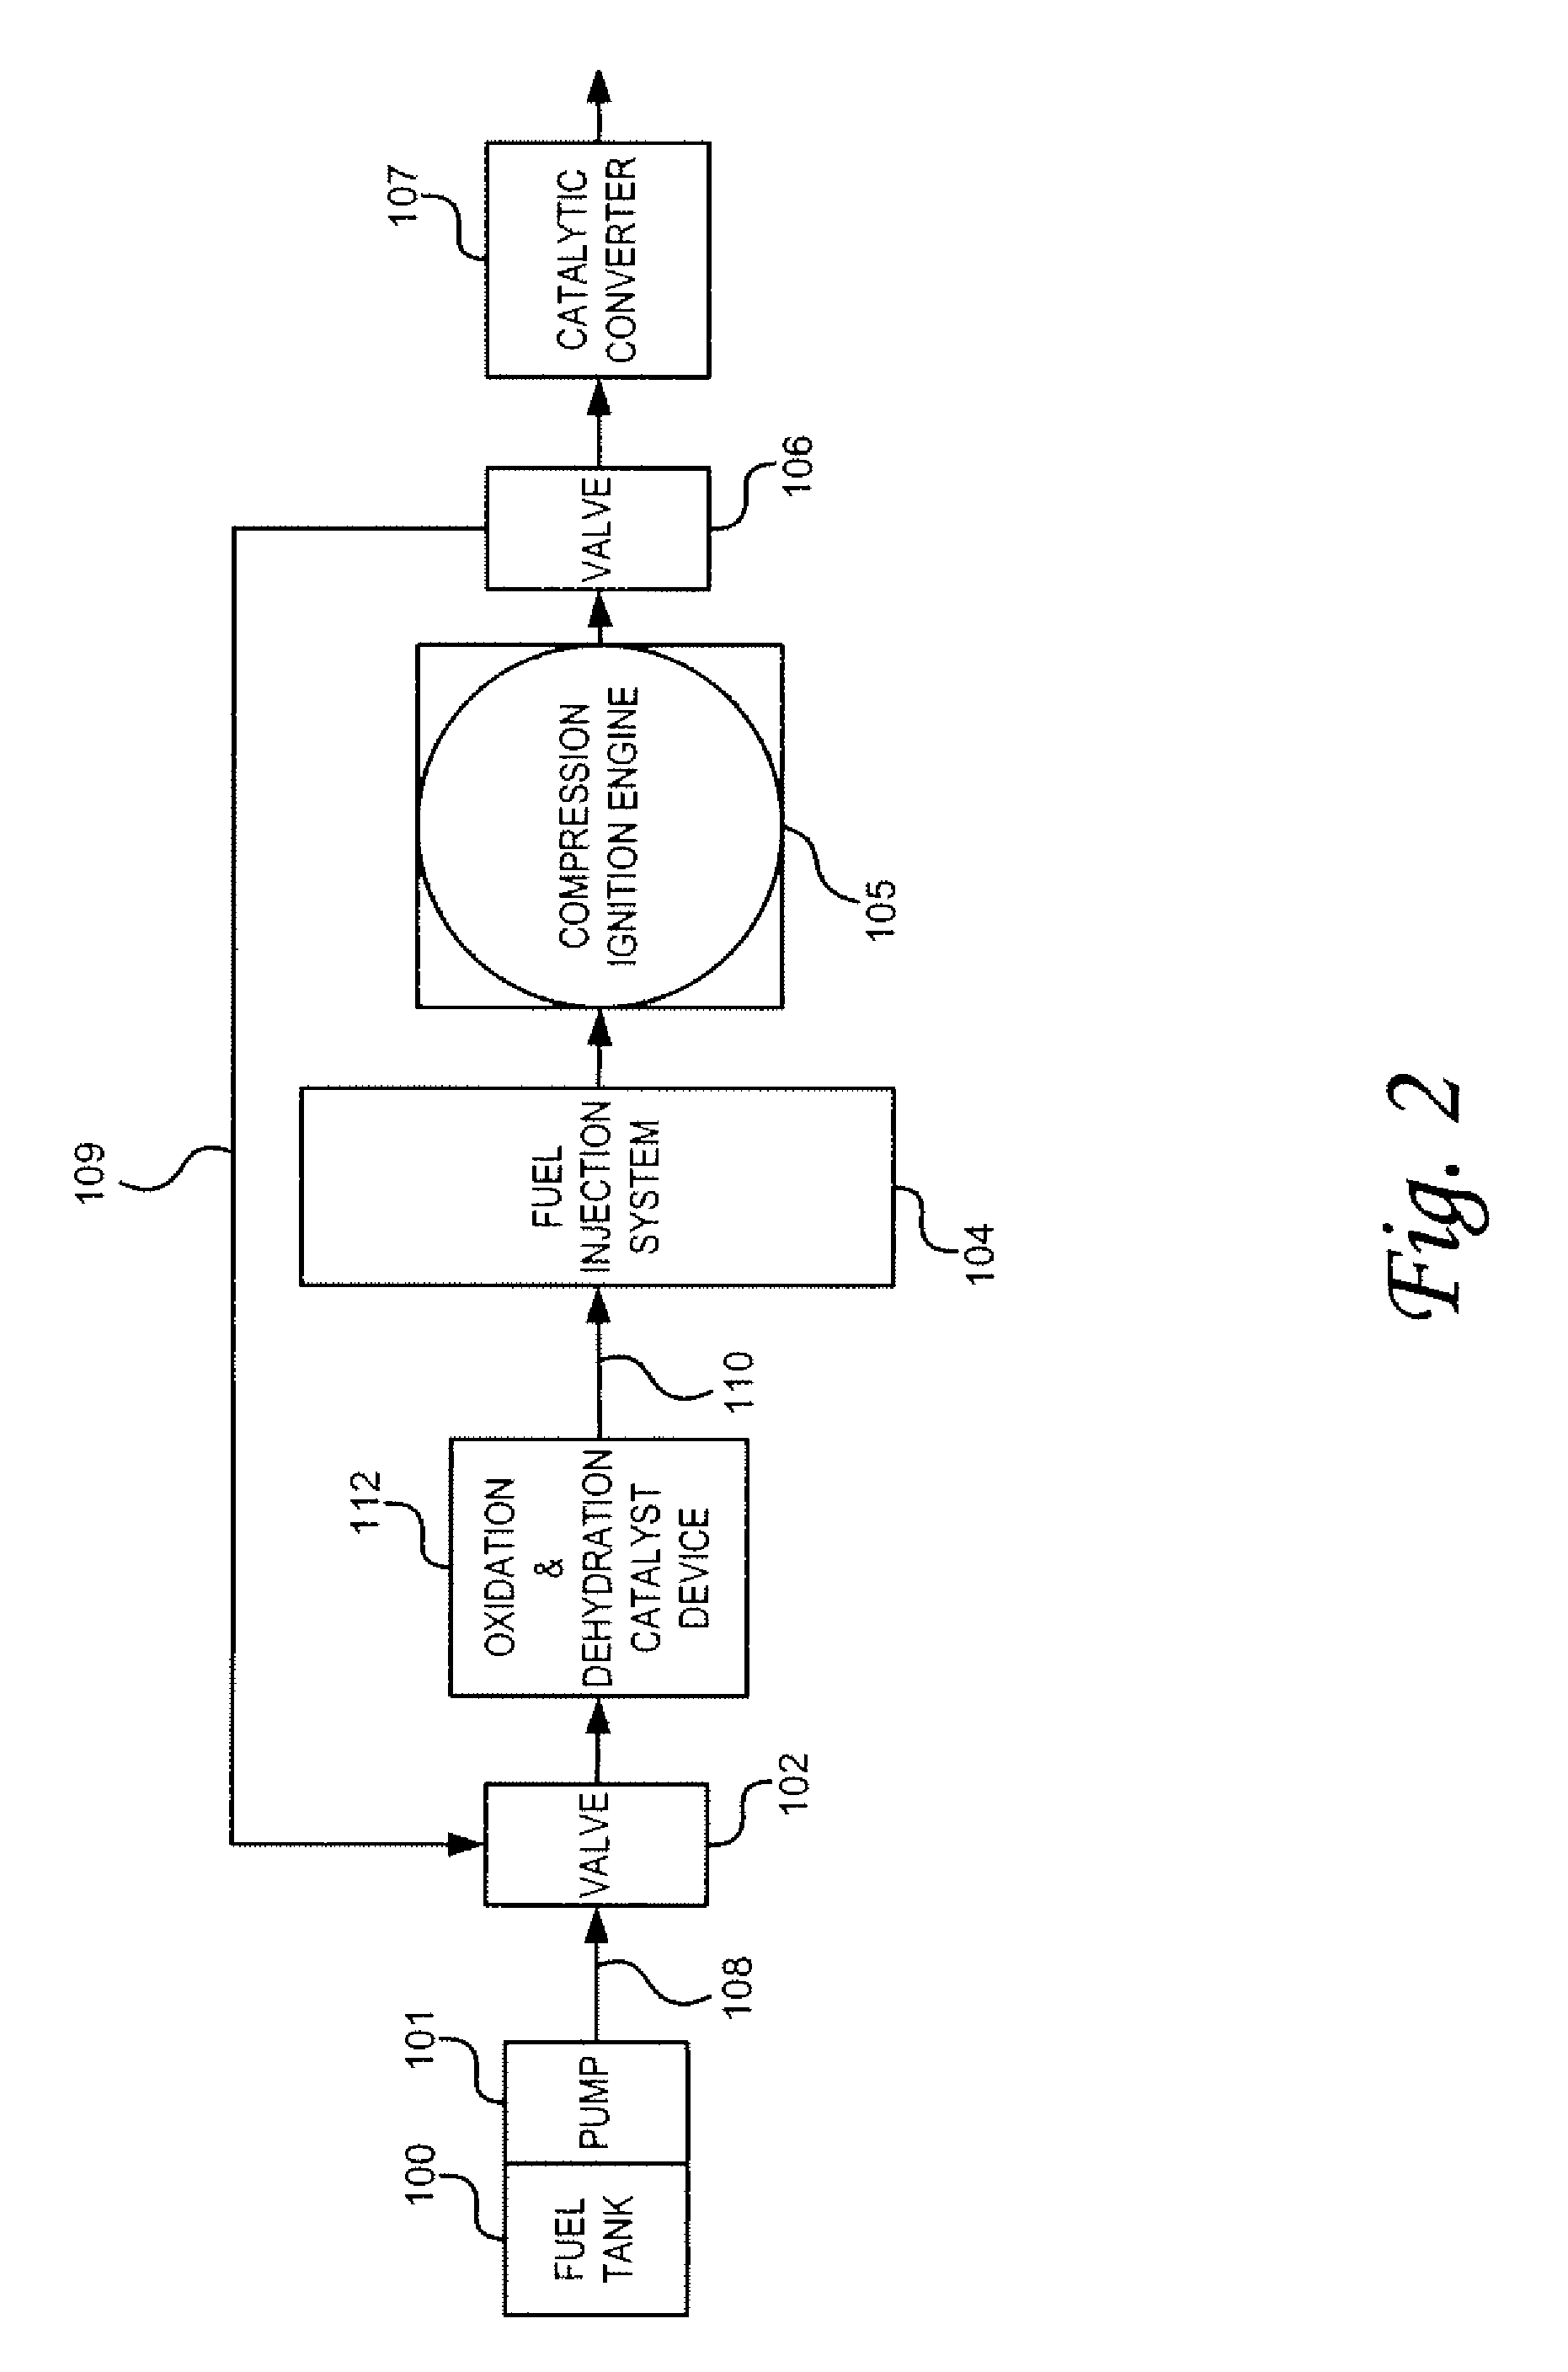 Catalytic fuel oxidation system using exhaust gas